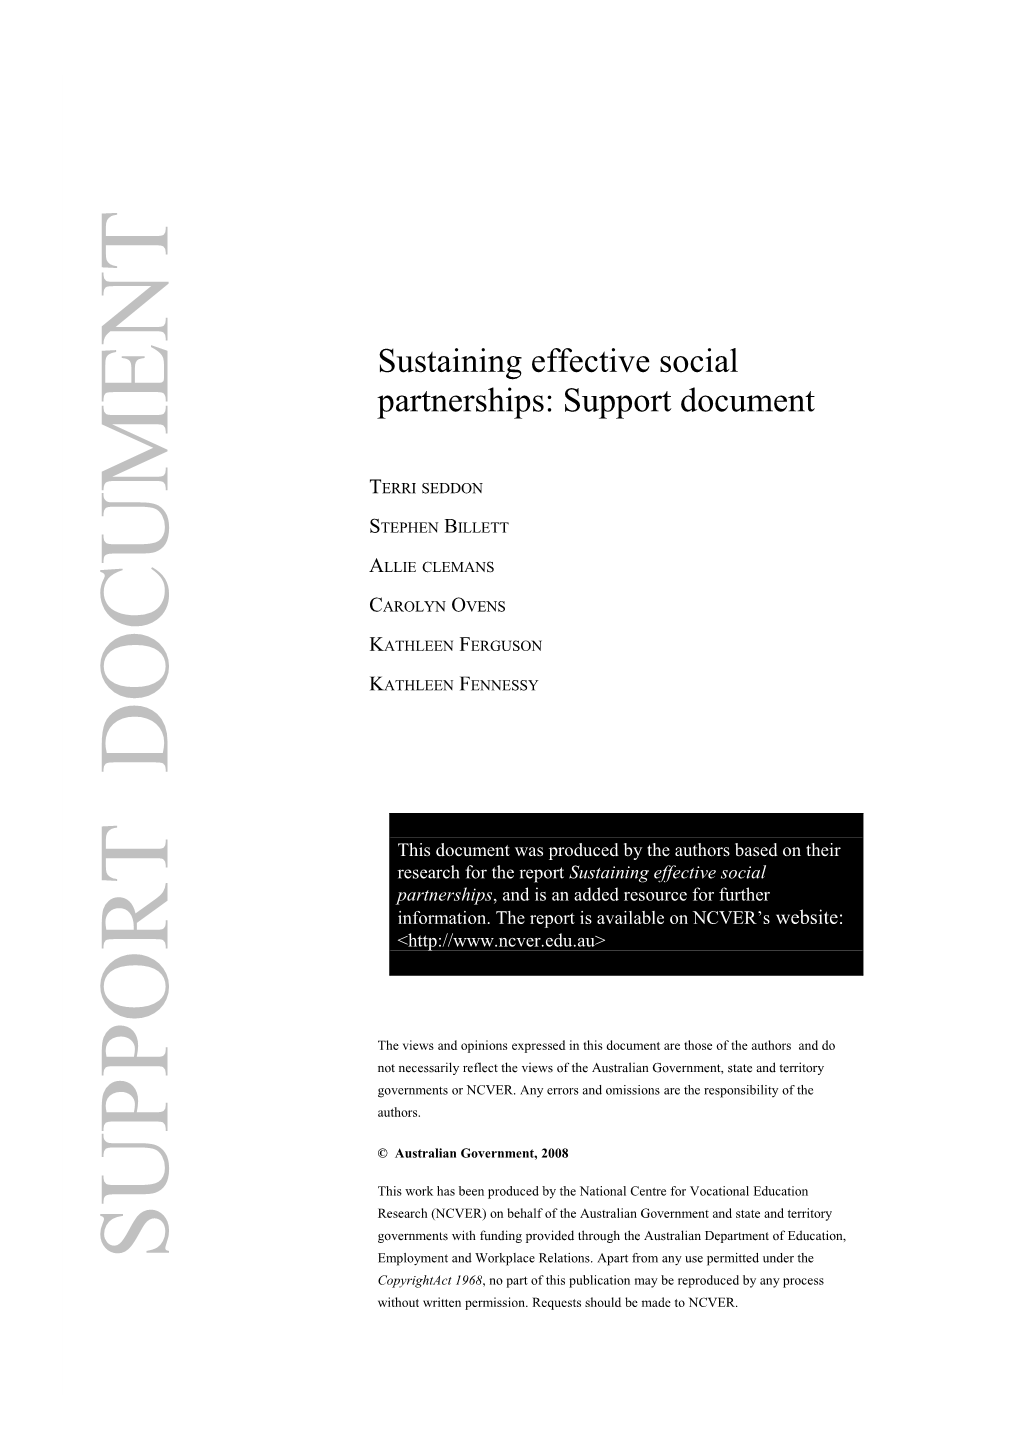 Support Document: Sustaining Effective Social Partnerships